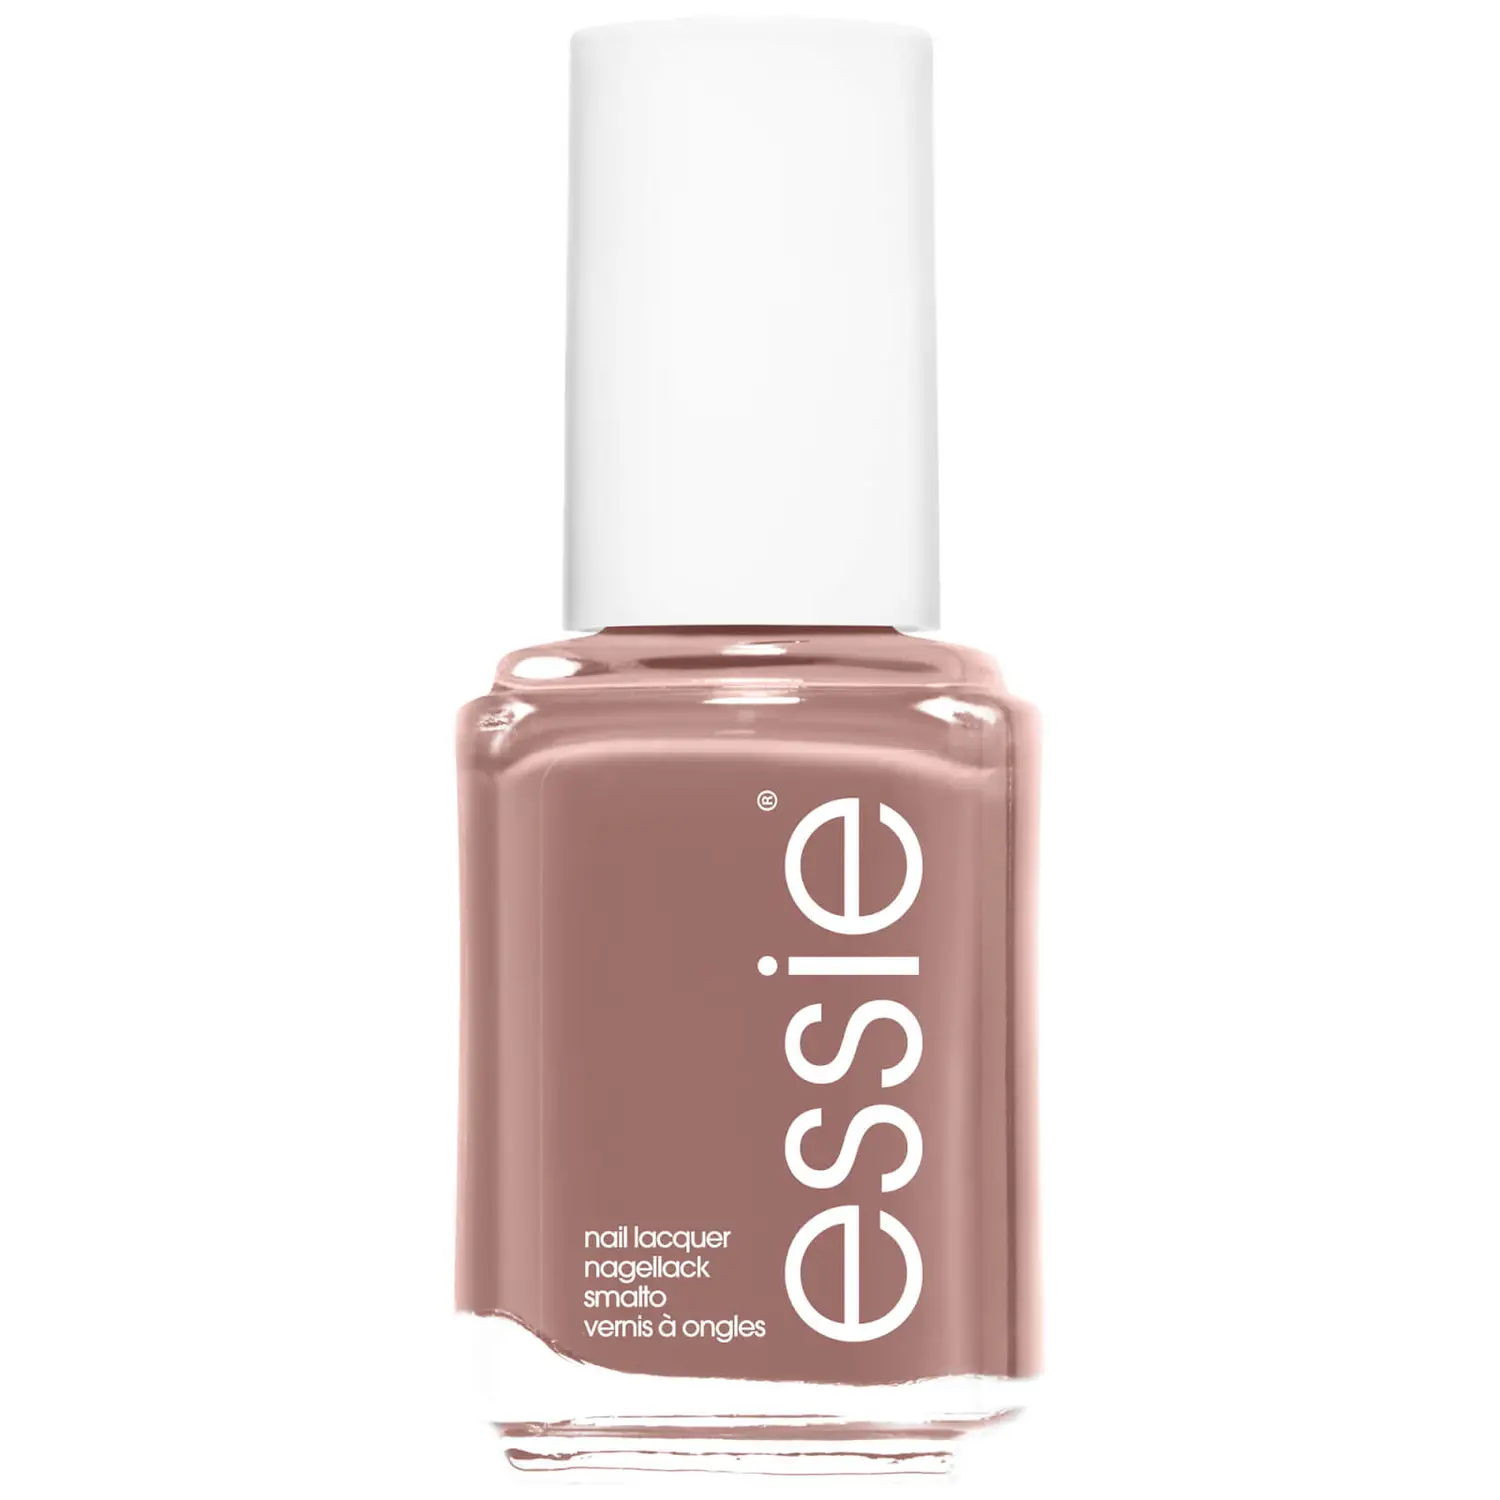 Clothing Optional 13.5ml from Essie 